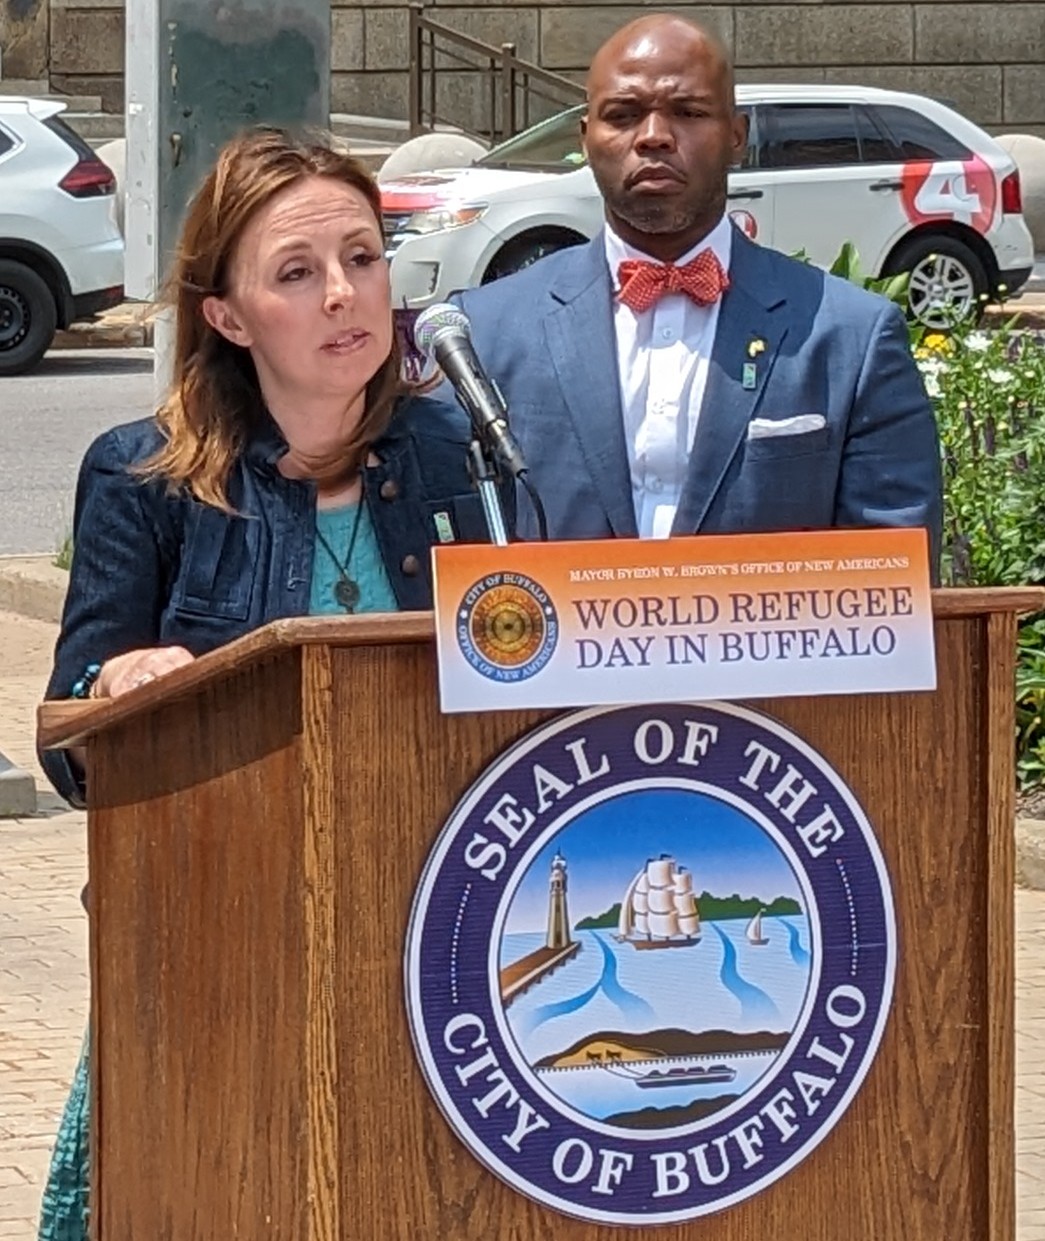 Executive Director Jennifer Rizzo-Choi Speaking with Buffalo Mayor Byron Brown and other City Officials to Commemorate World Refugee Day